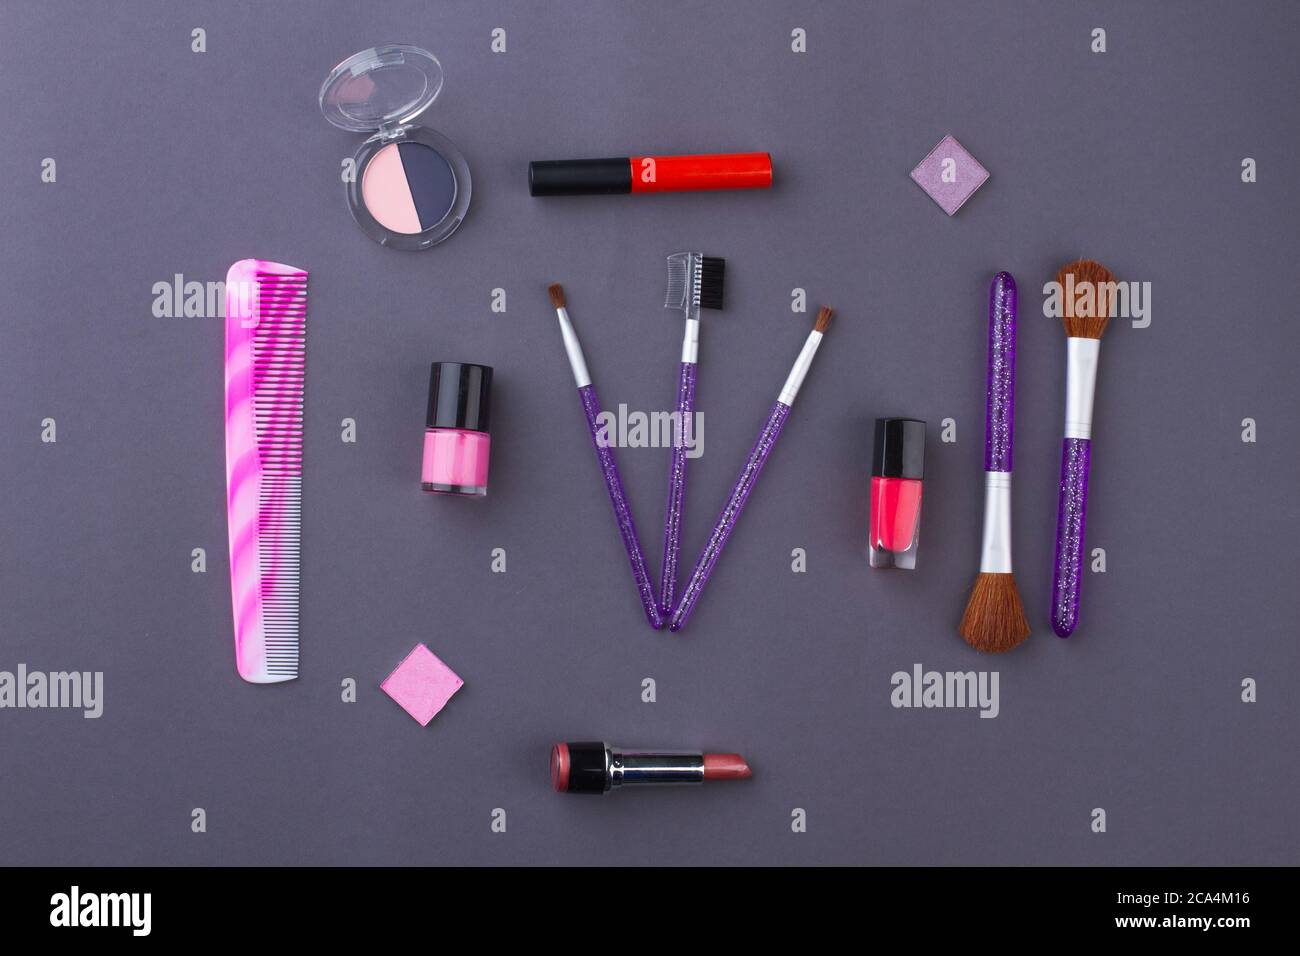 Set of beauty layout female accessories. Stock Photo